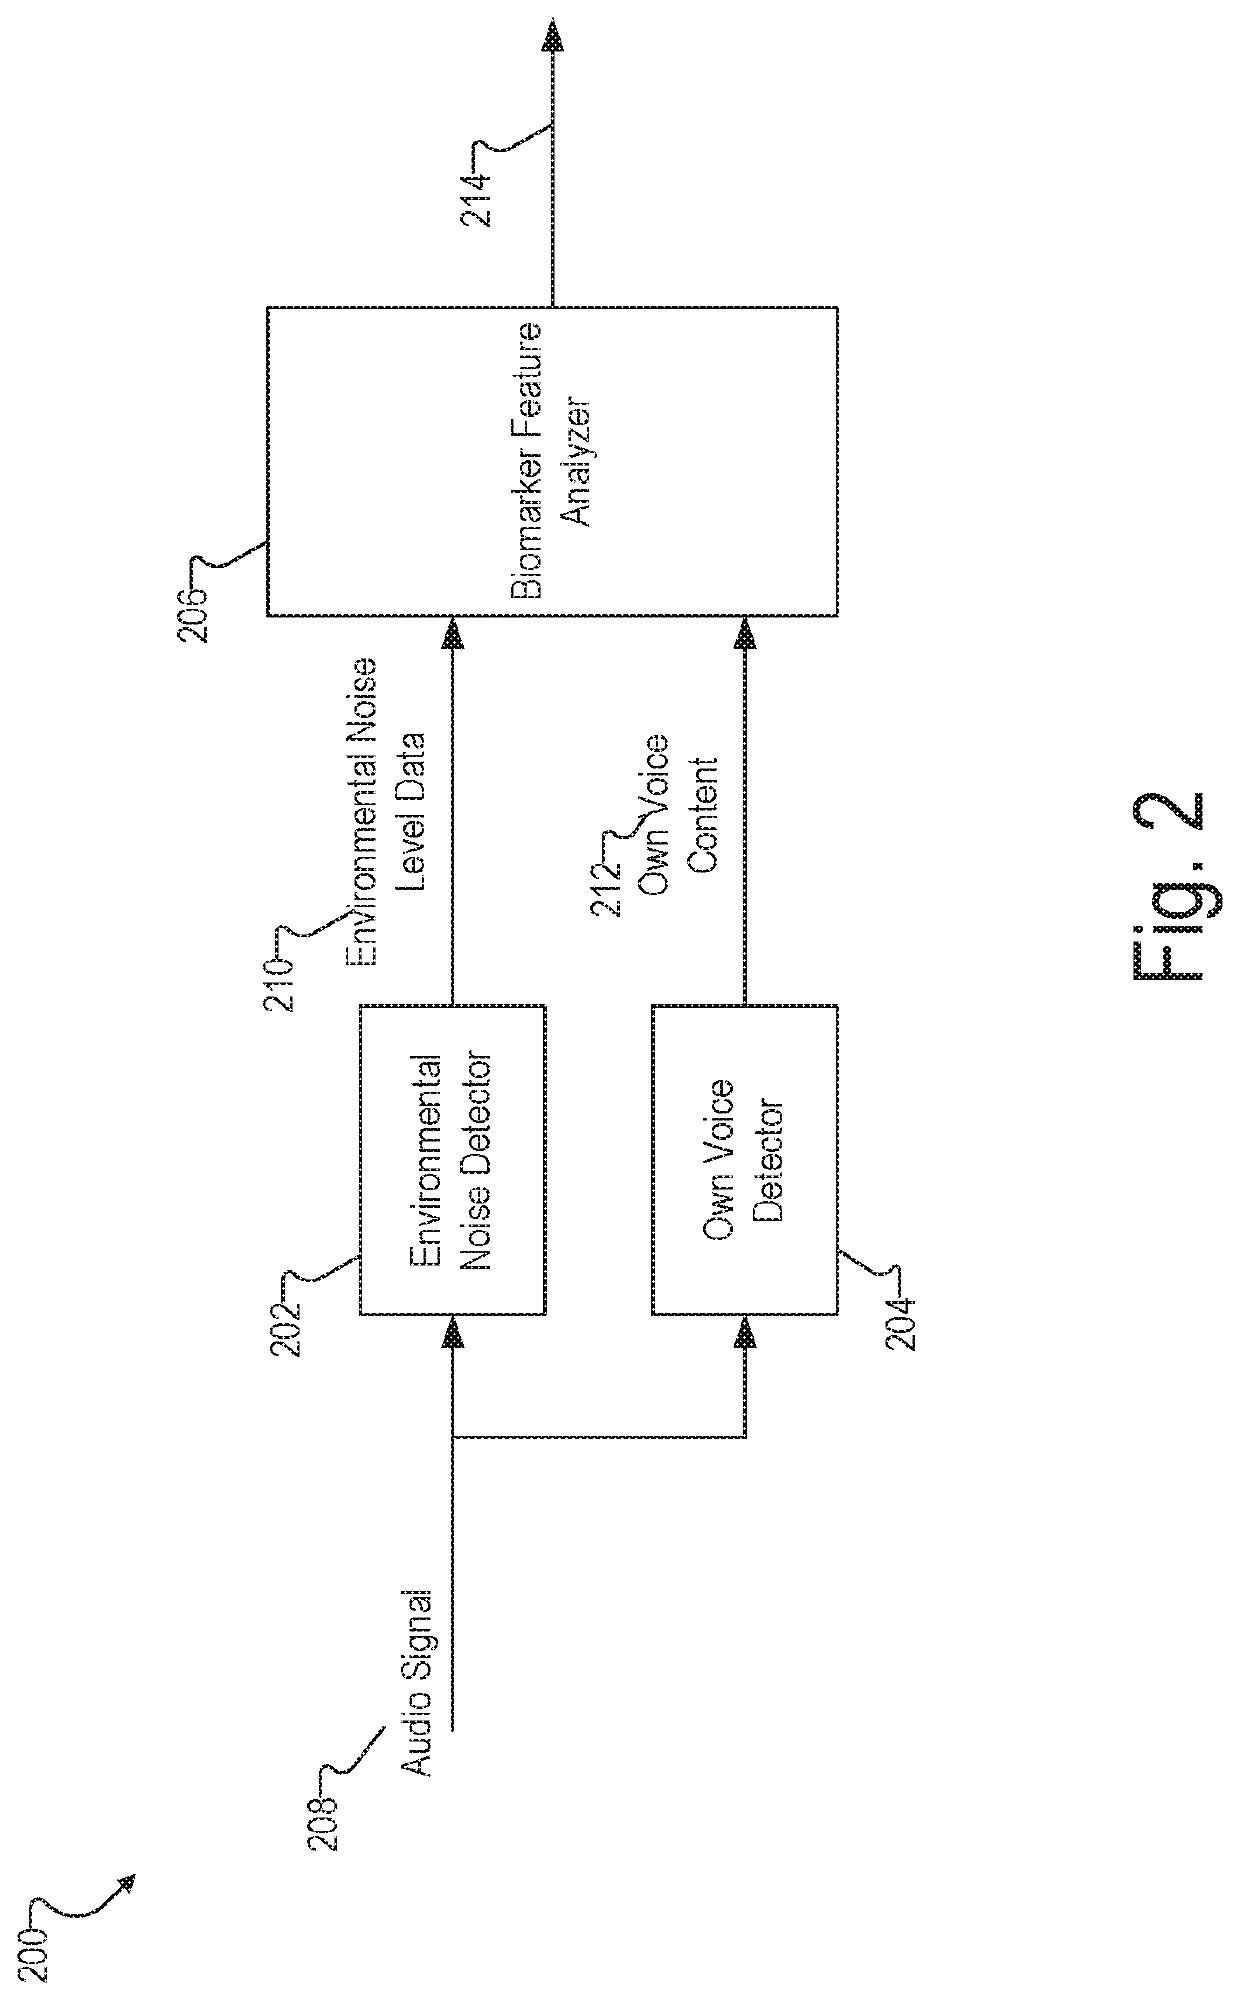 Systems and Methods for Biomarker Analysis On a Hearing Device